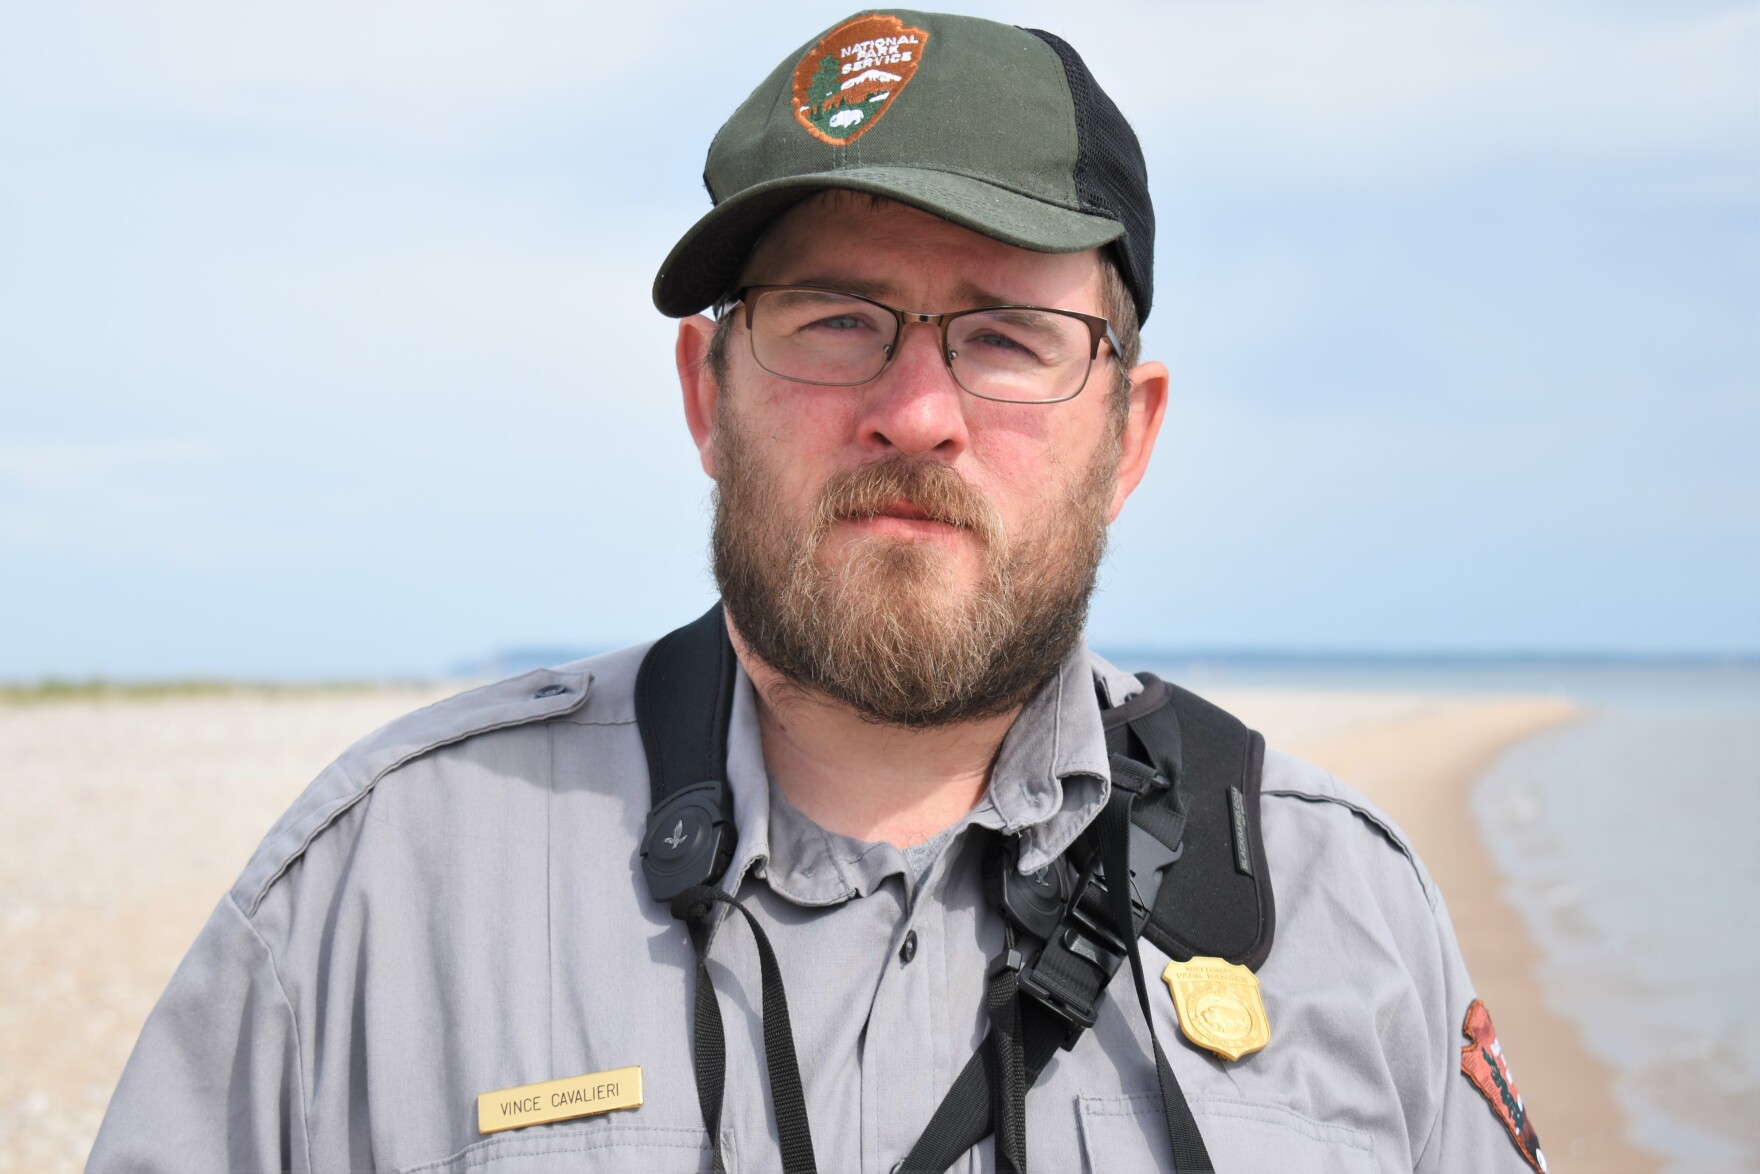 a white man with a beard and glasses wearing a park uniform looks solemnly into the camera